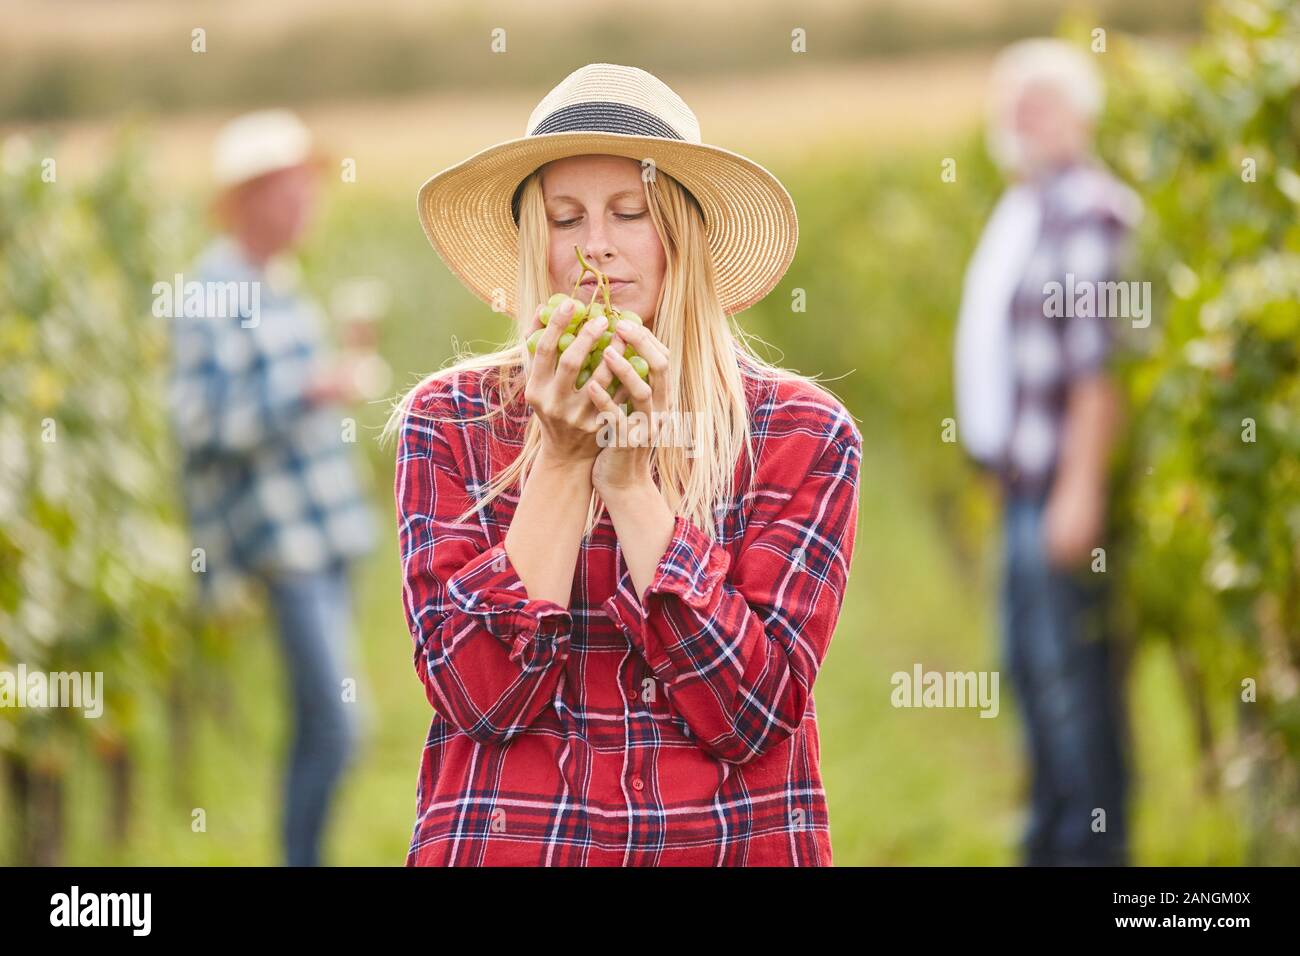 Young woman as a winemaker picking grapes with white grapes as a selection Stock Photo